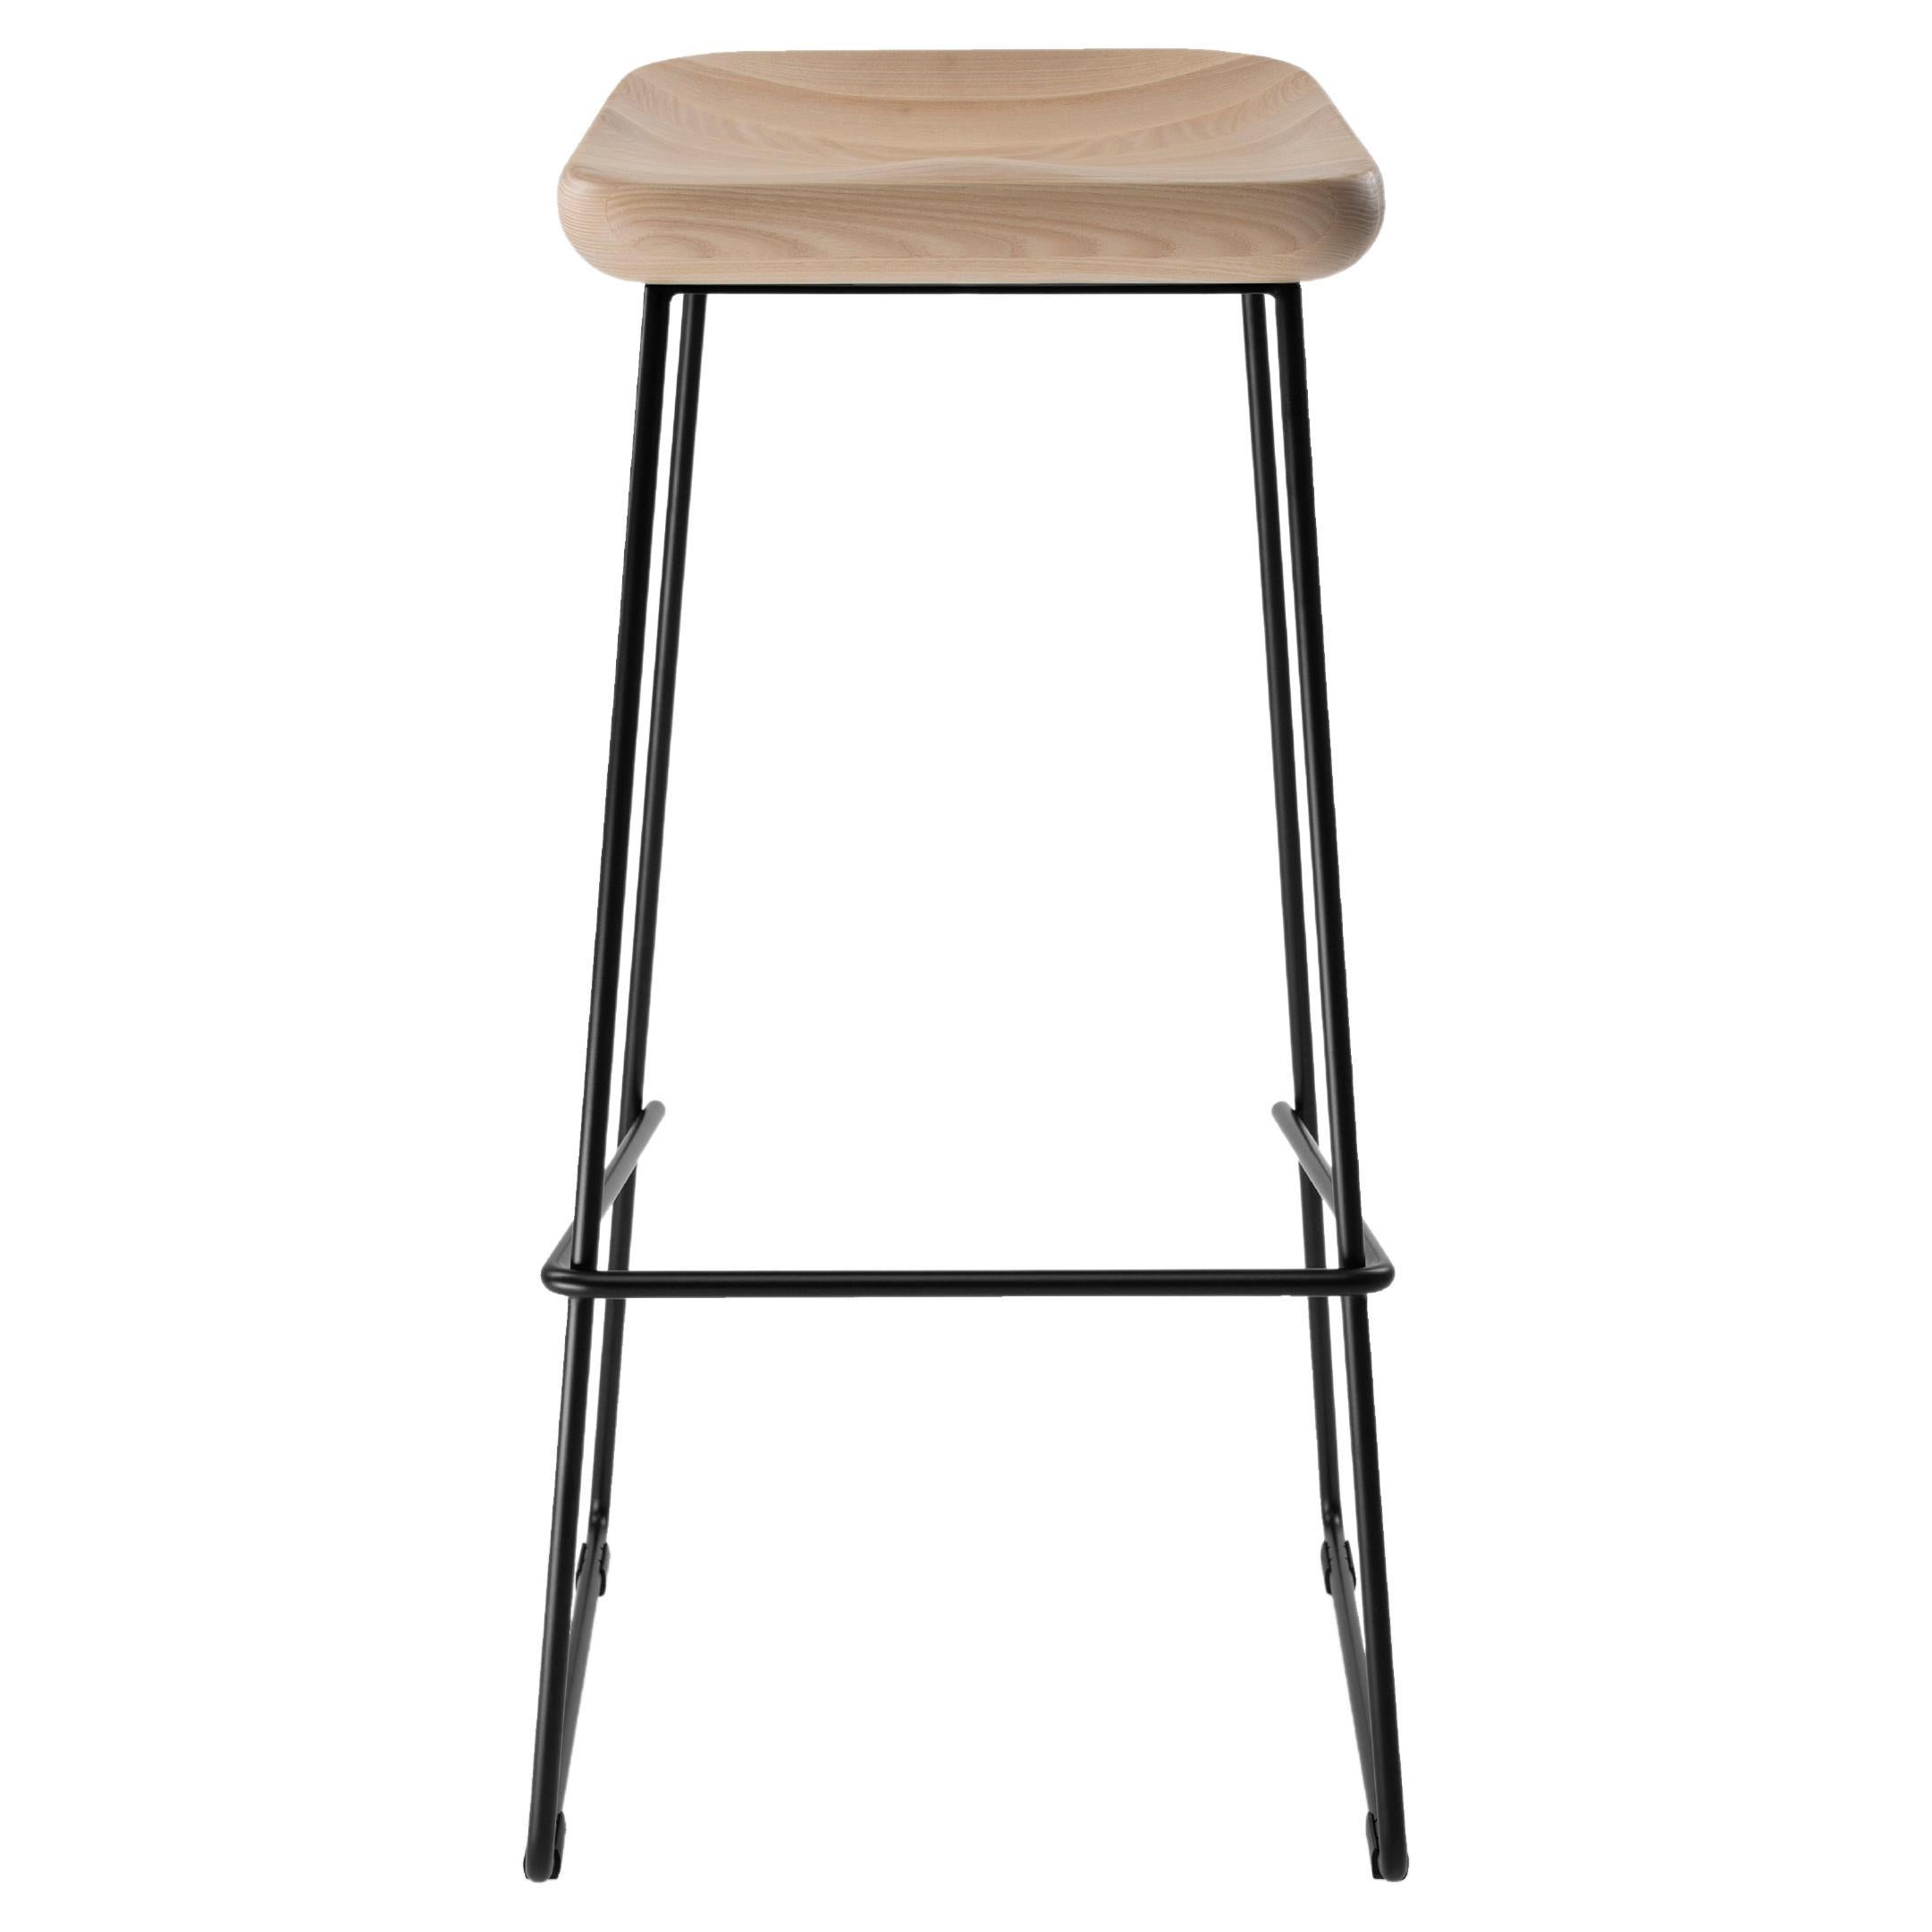 Stylish and Comfortable Bar Stool Wave with oak Solid Wood Seat and Steel Frame. Discover the perfect seating solution for your bar or kitchen counter with the bar Stool Wave with oak Solid Wood. Made with a comfortable bar stool wave with oak solid